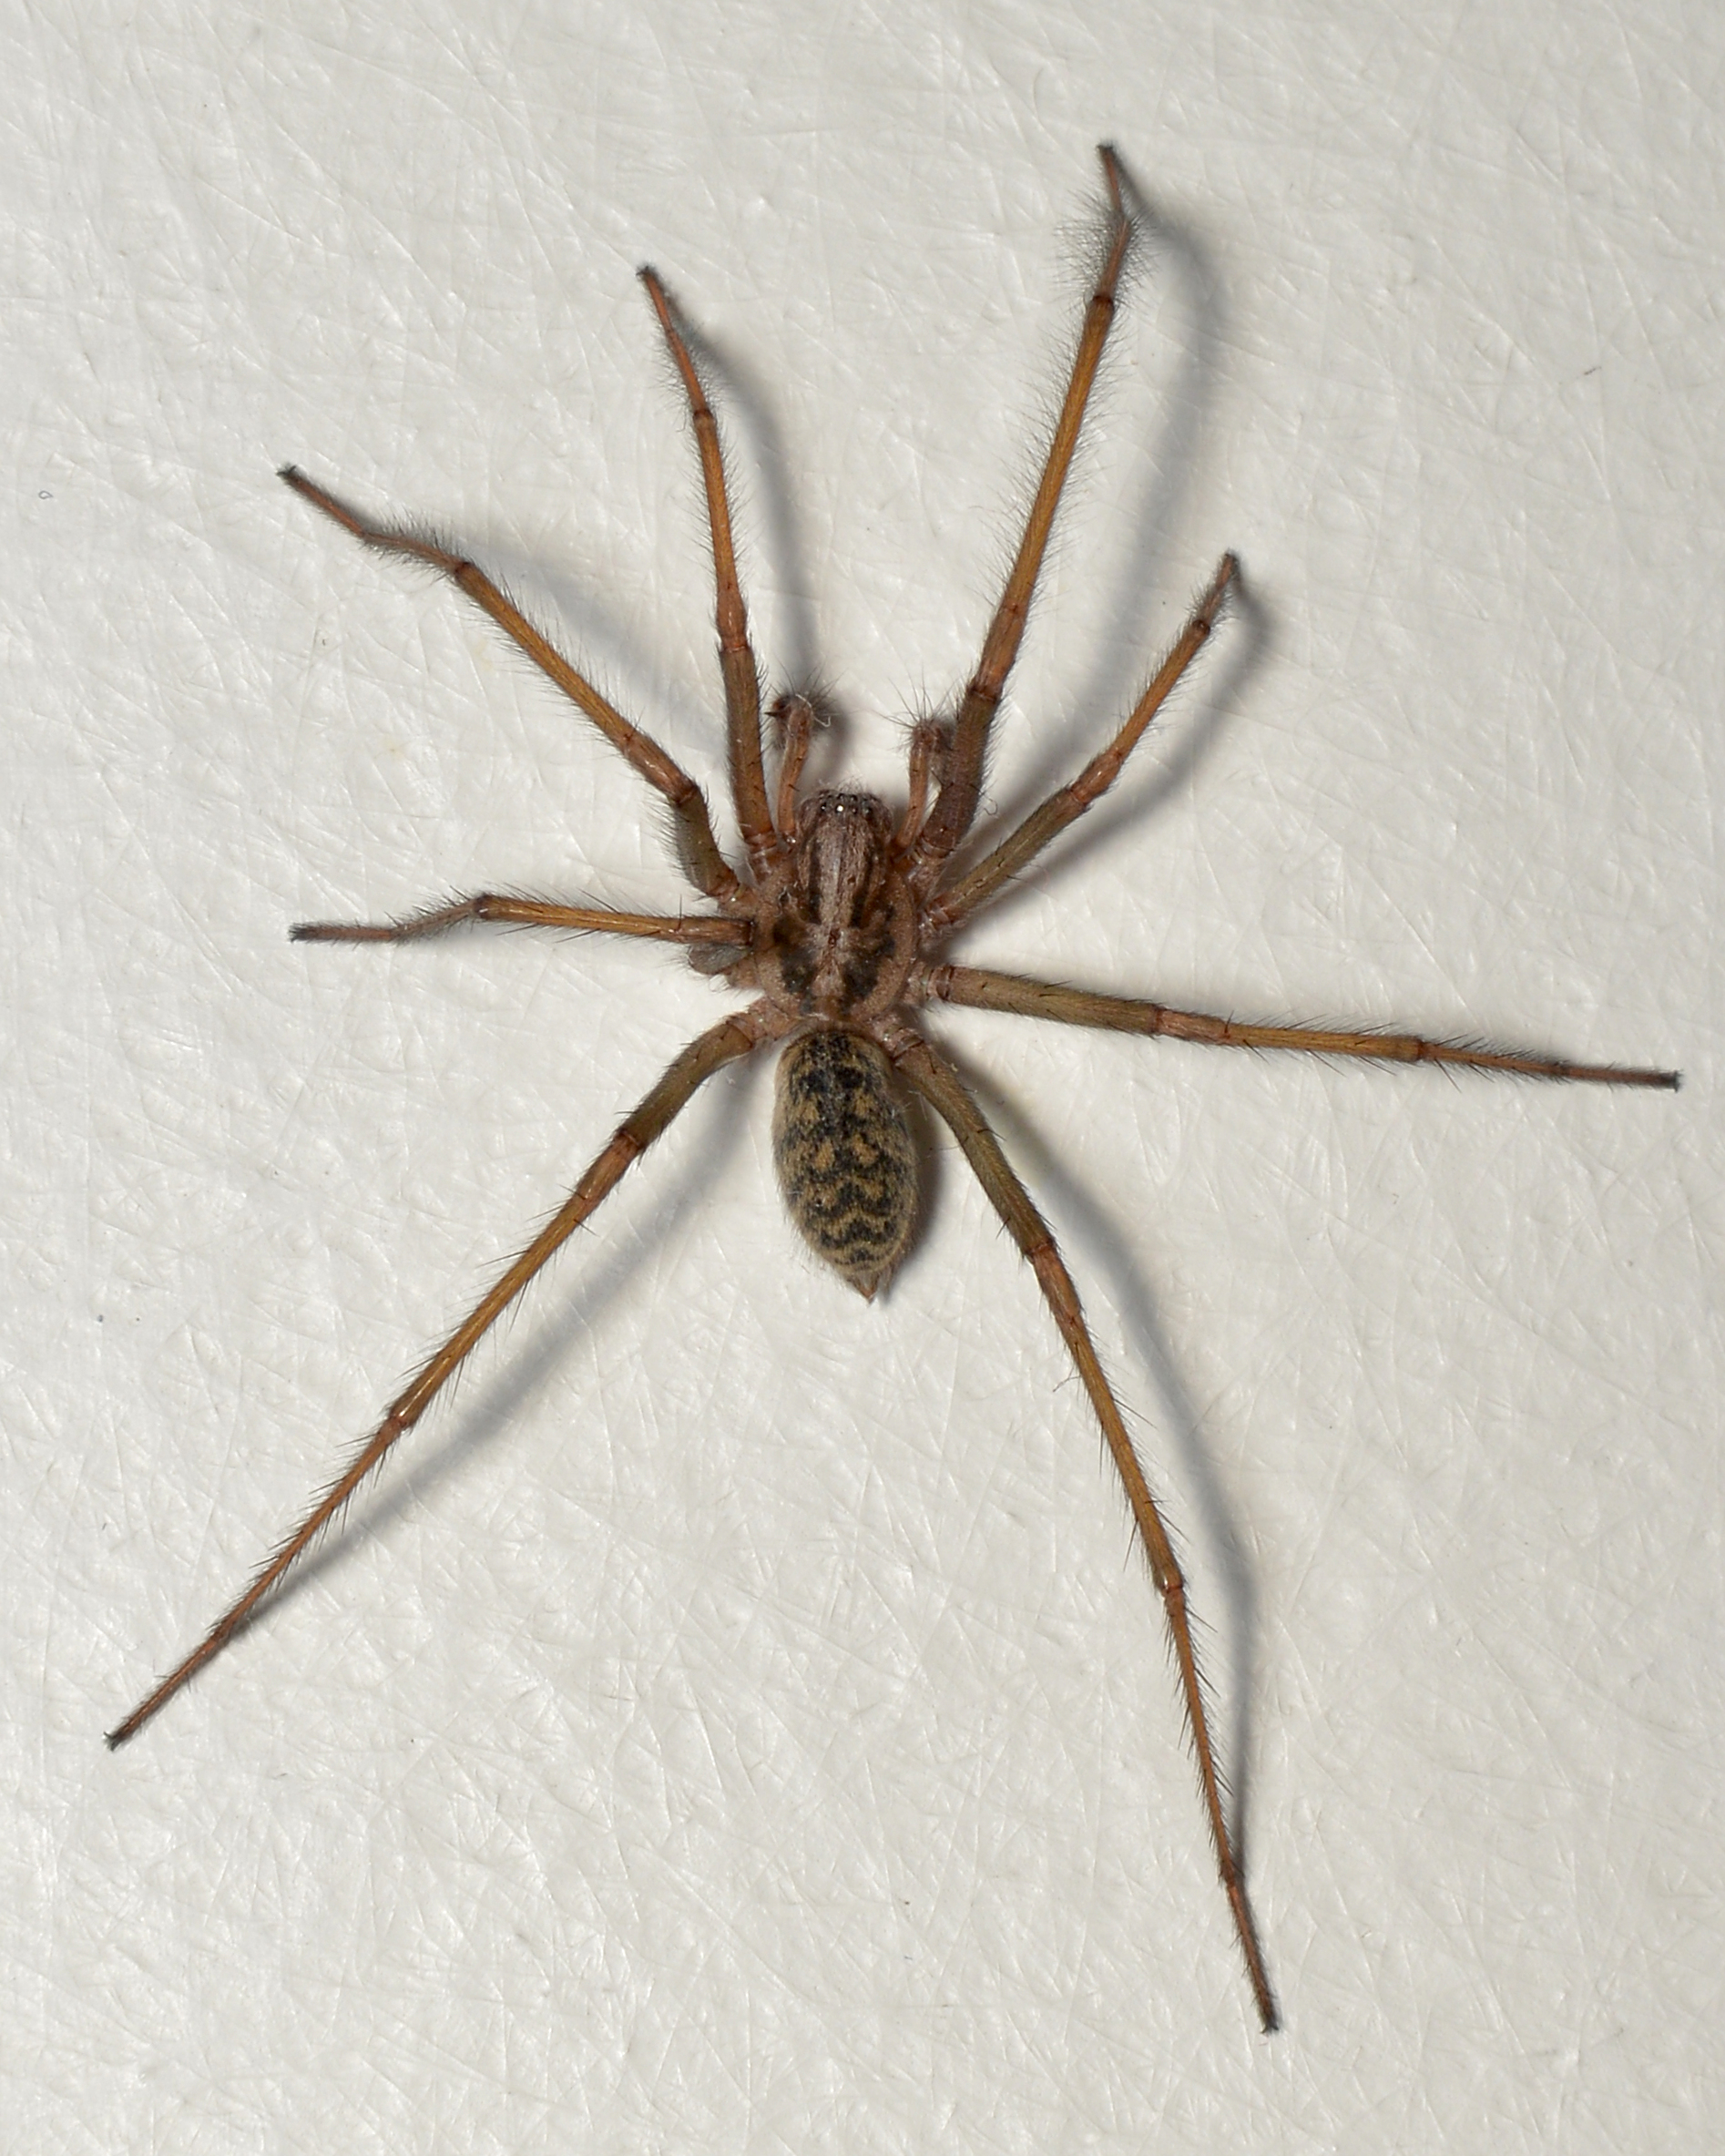 Giant house spider - Wikipedia